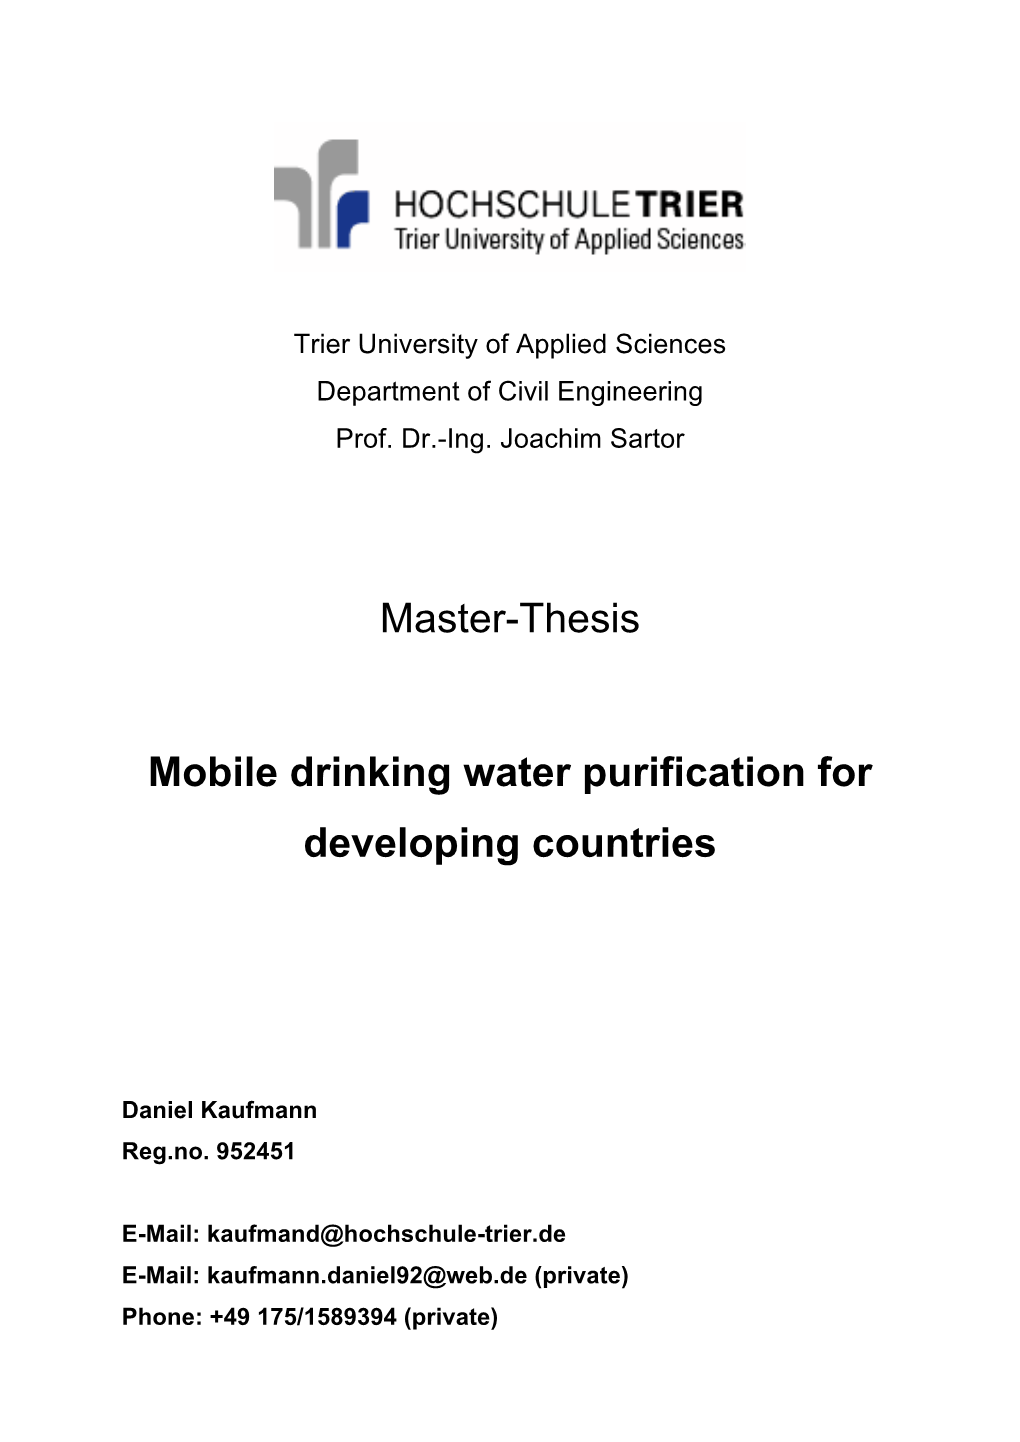 Master-Thesis Mobile Drinking Water Purification for Developing Countries